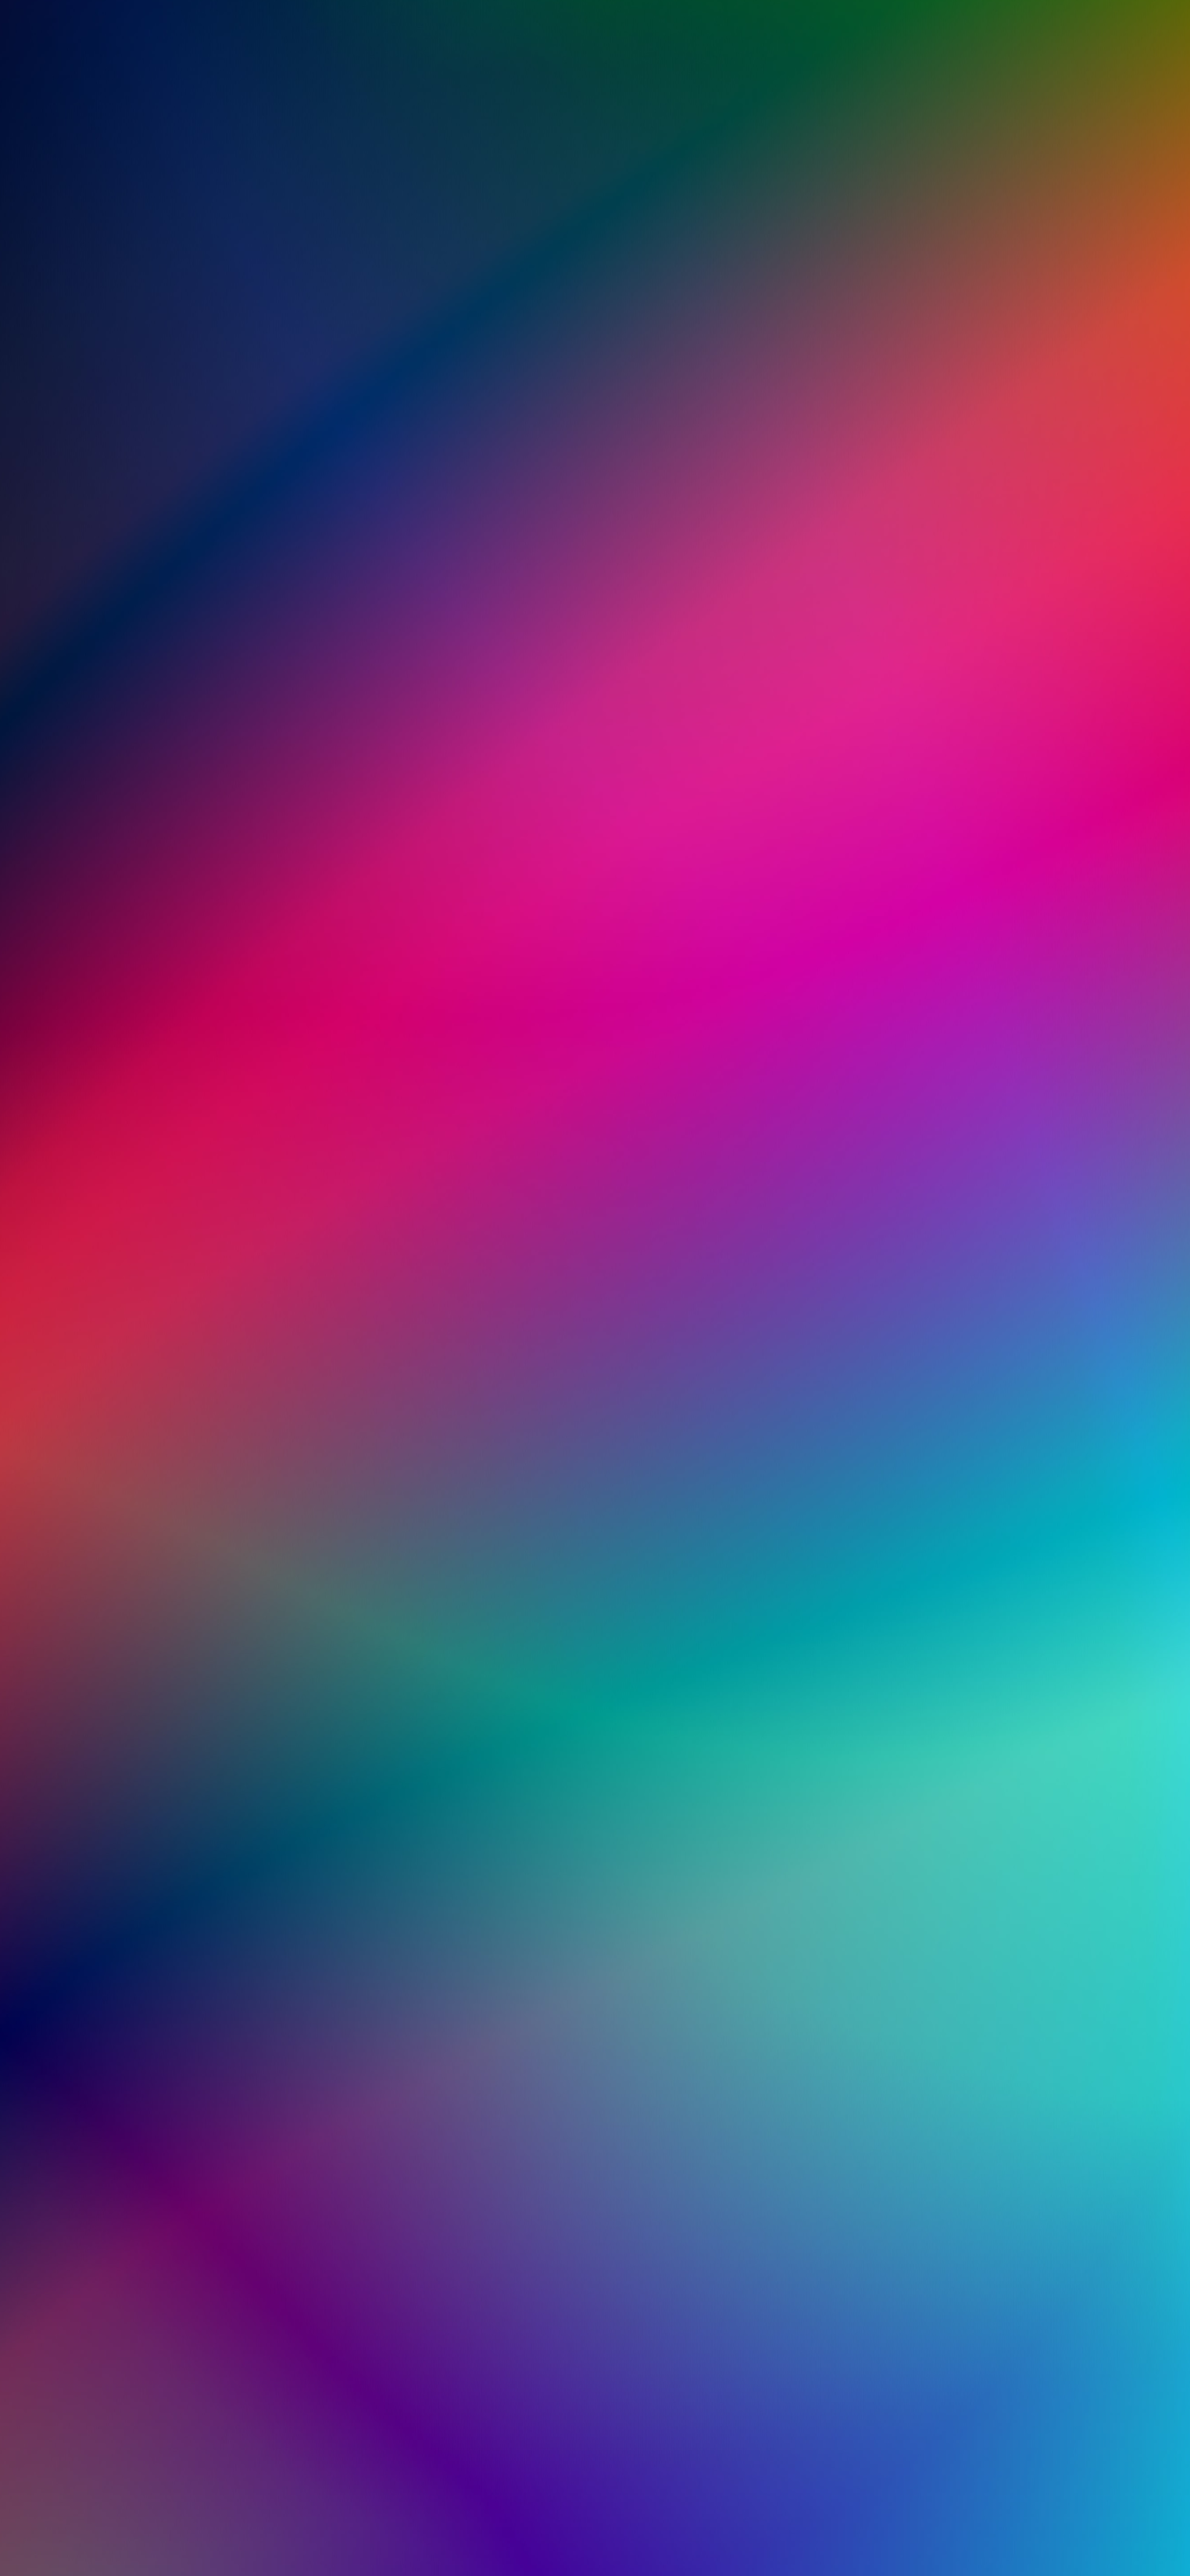 Colors Wallpaper for iPhone Pro Max, X, 6